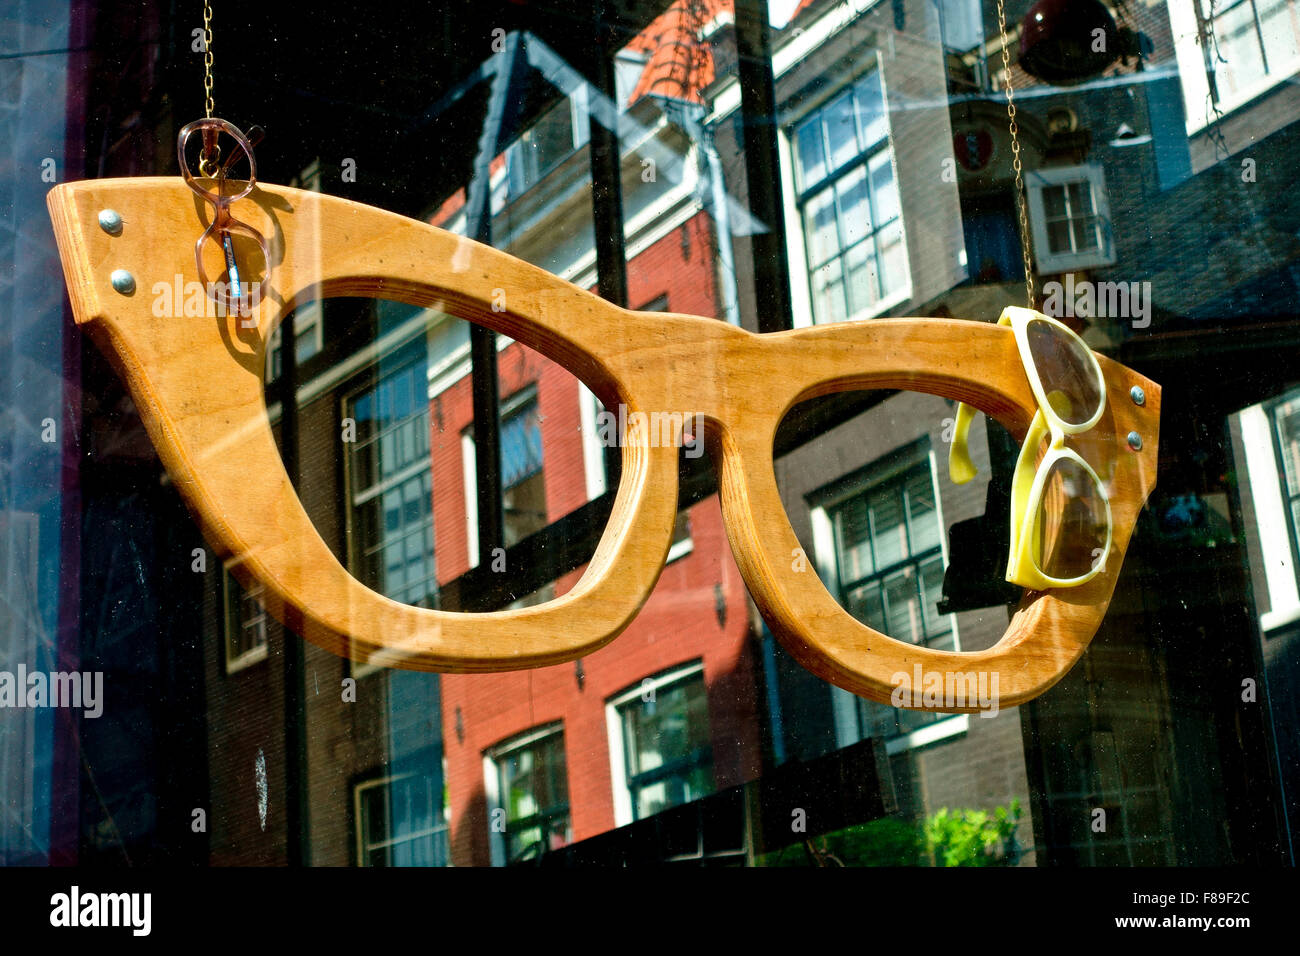 Close up of oversize, huge, big eye glasses frame as optician's sign advertisement hanging in the shop window display. Amsterdam, Netherlands, Europe Stock Photo